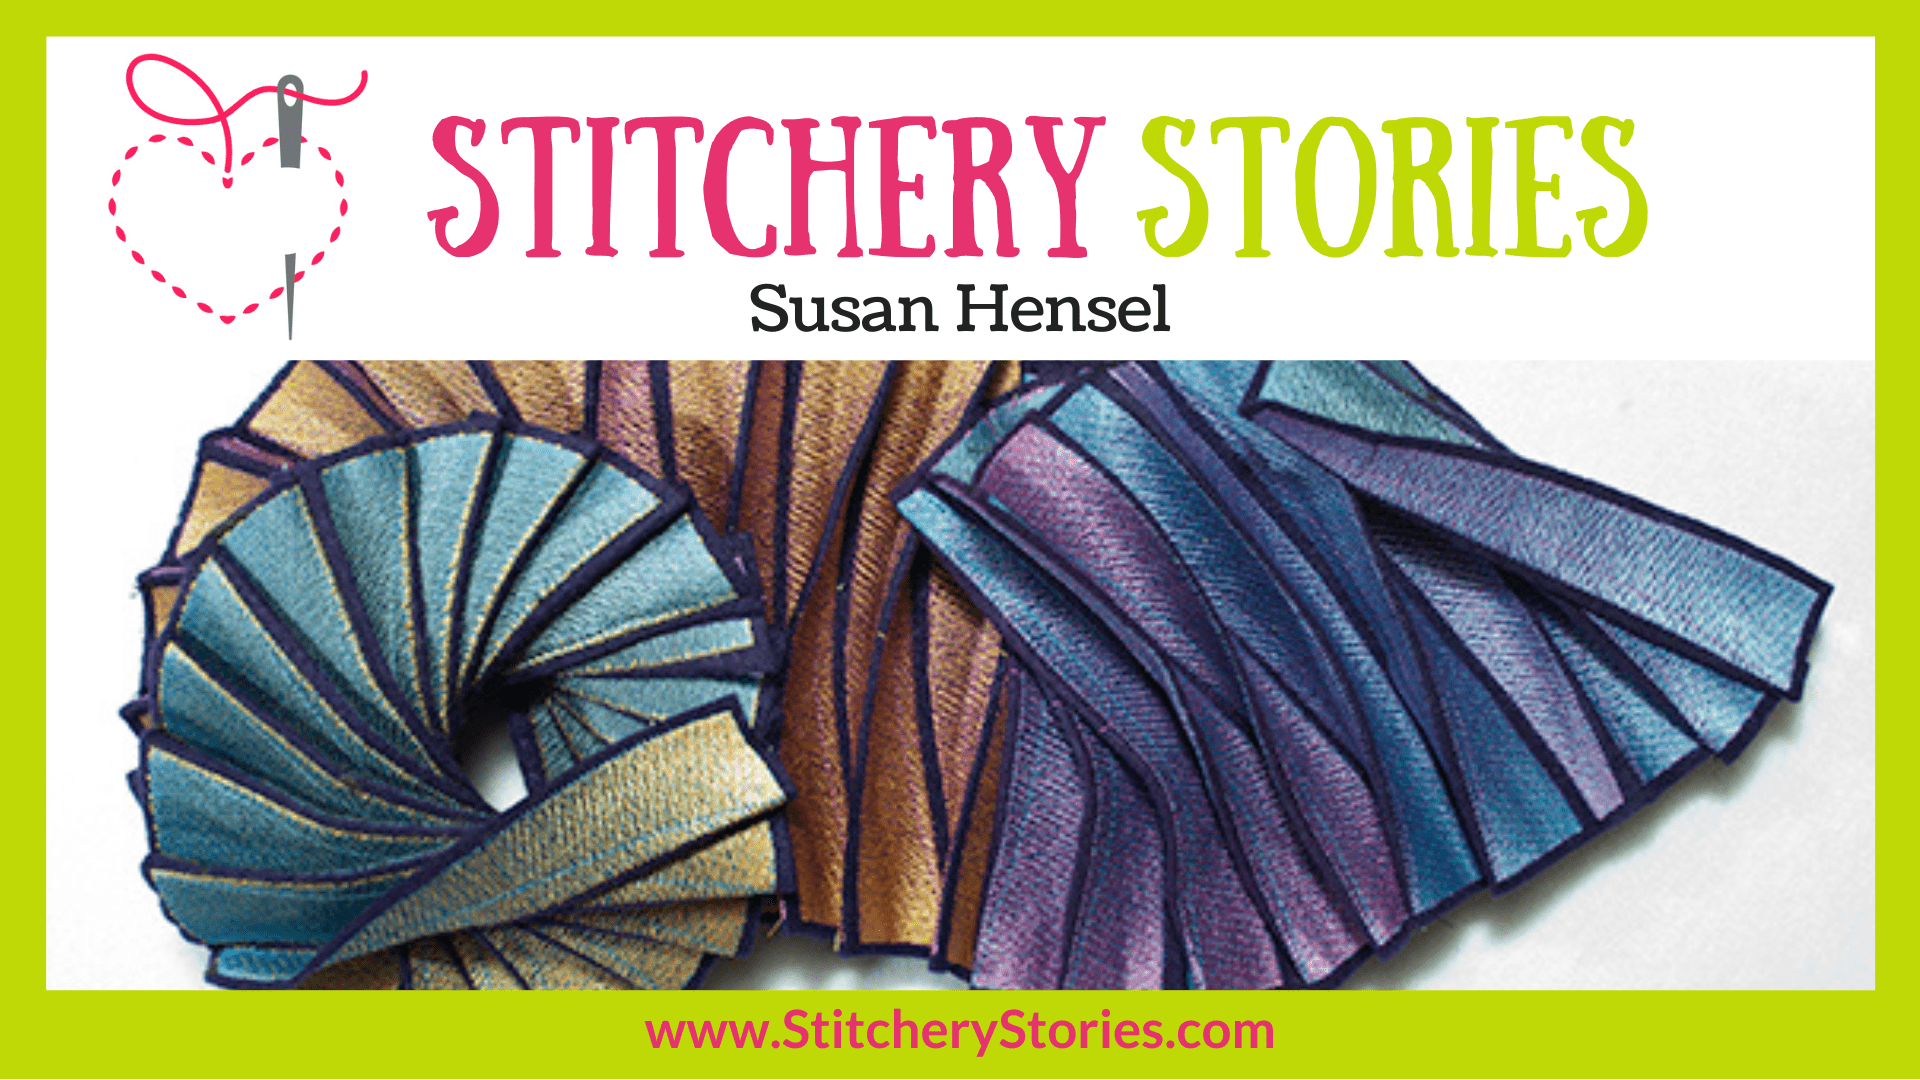 digital machine embroidery by susan hensel guest on stitchery stories textile art podcast